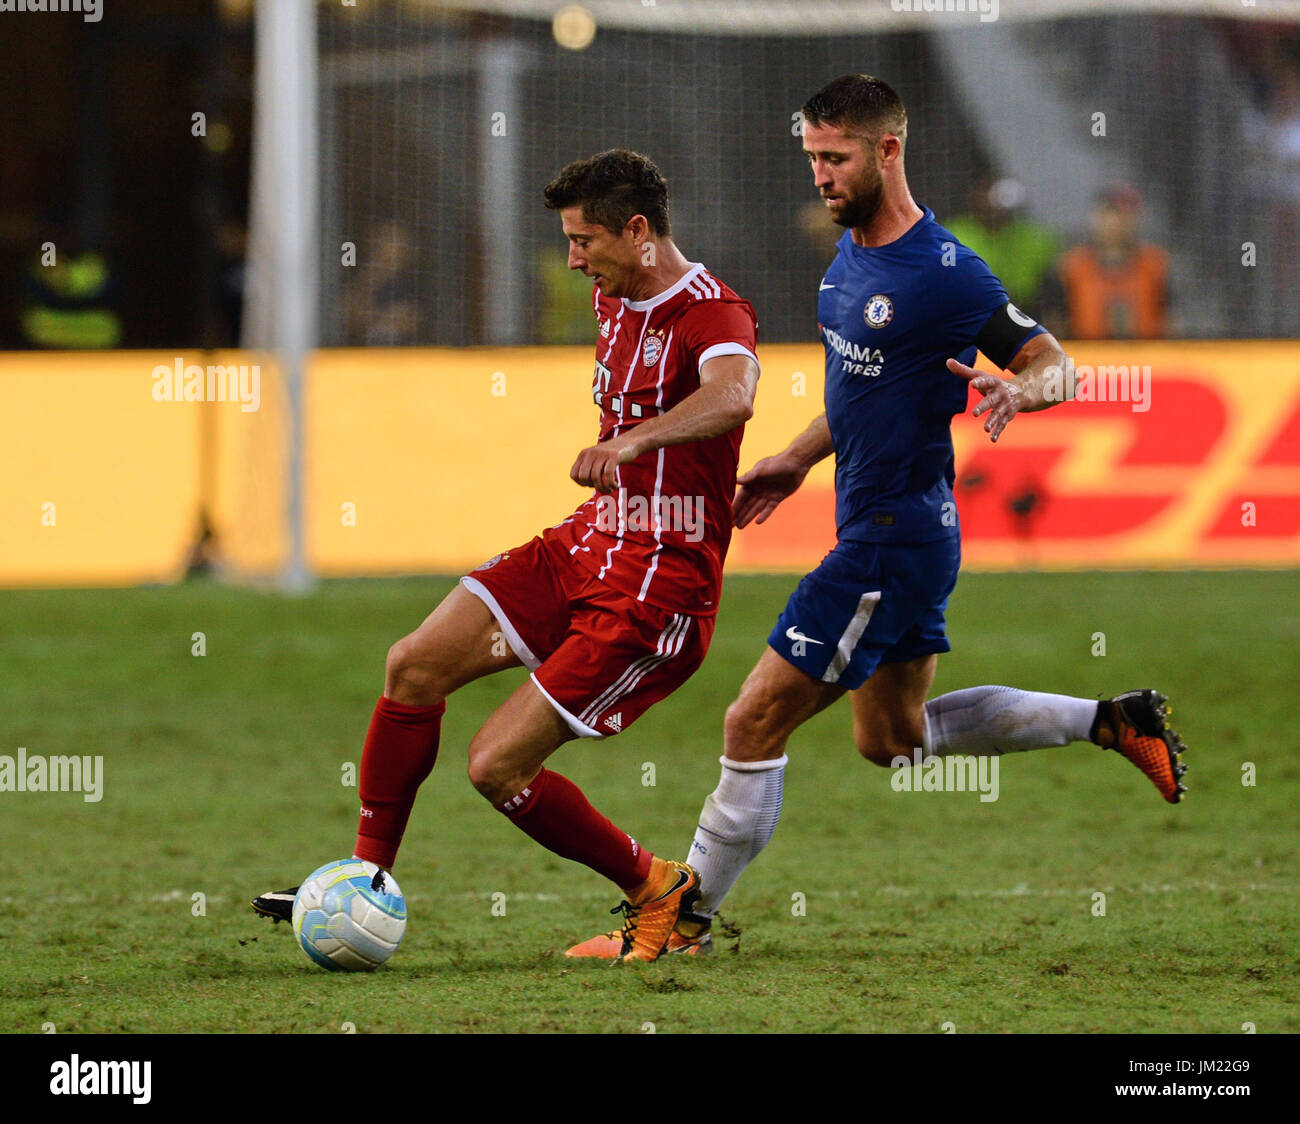 Singapore, Singapore. 25th July, 2017. Robert Lewandowski of FC Bayern Munich (L) dribbles past Gary Cahill of Chelsea FC (R) during the International Champions Cup match between FC Bayern Munich and Chelsea FC in Singapore, 25 July 2017. Photo: Mohammed/dpa/Alamy Live News Stock Photo